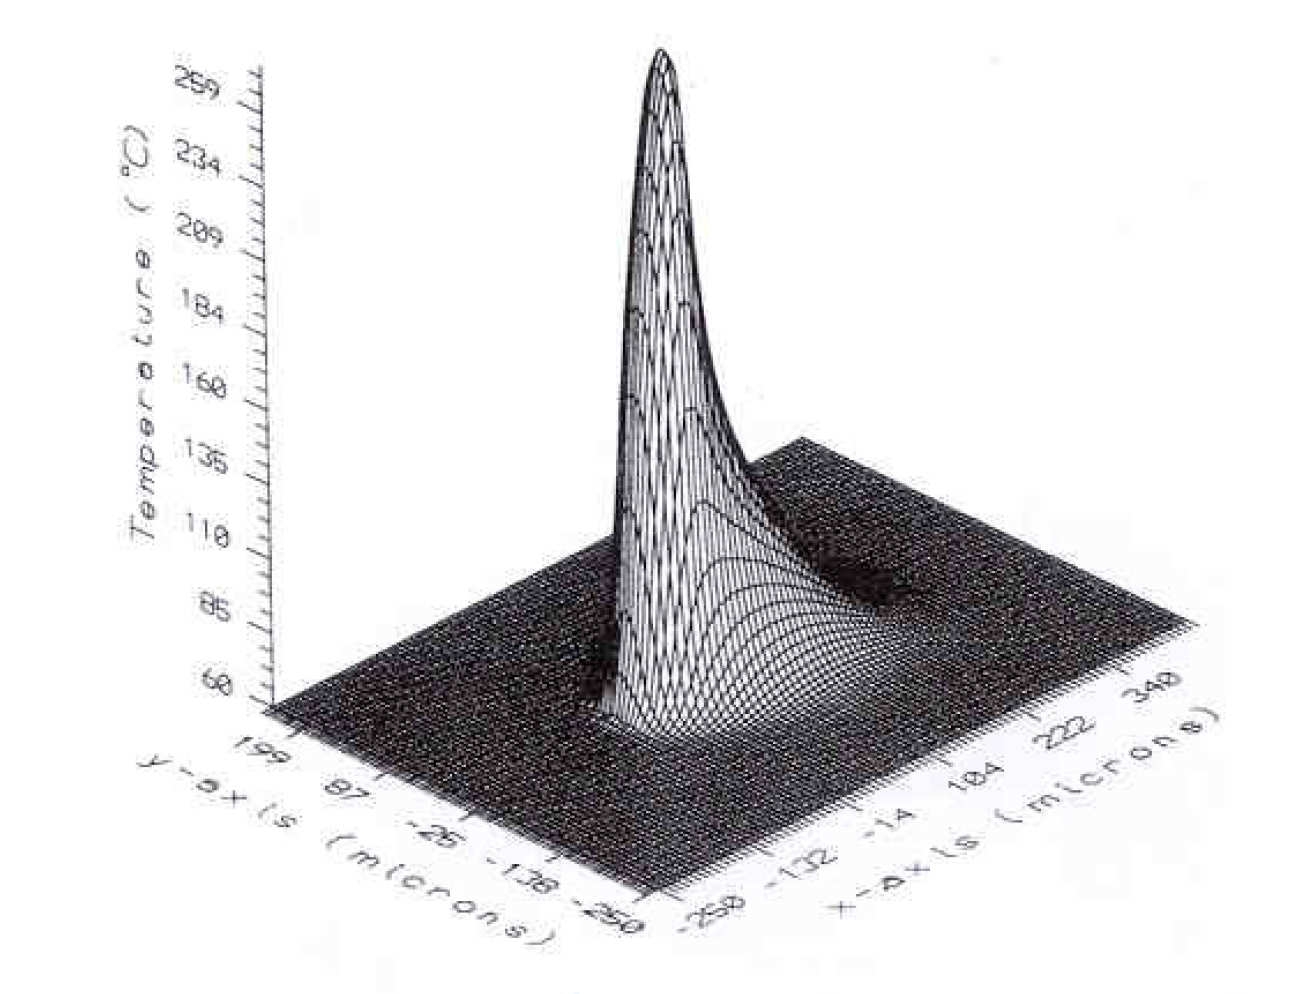 Computed temperature distribution on a surface due to an entrapped debris particle in a contact.